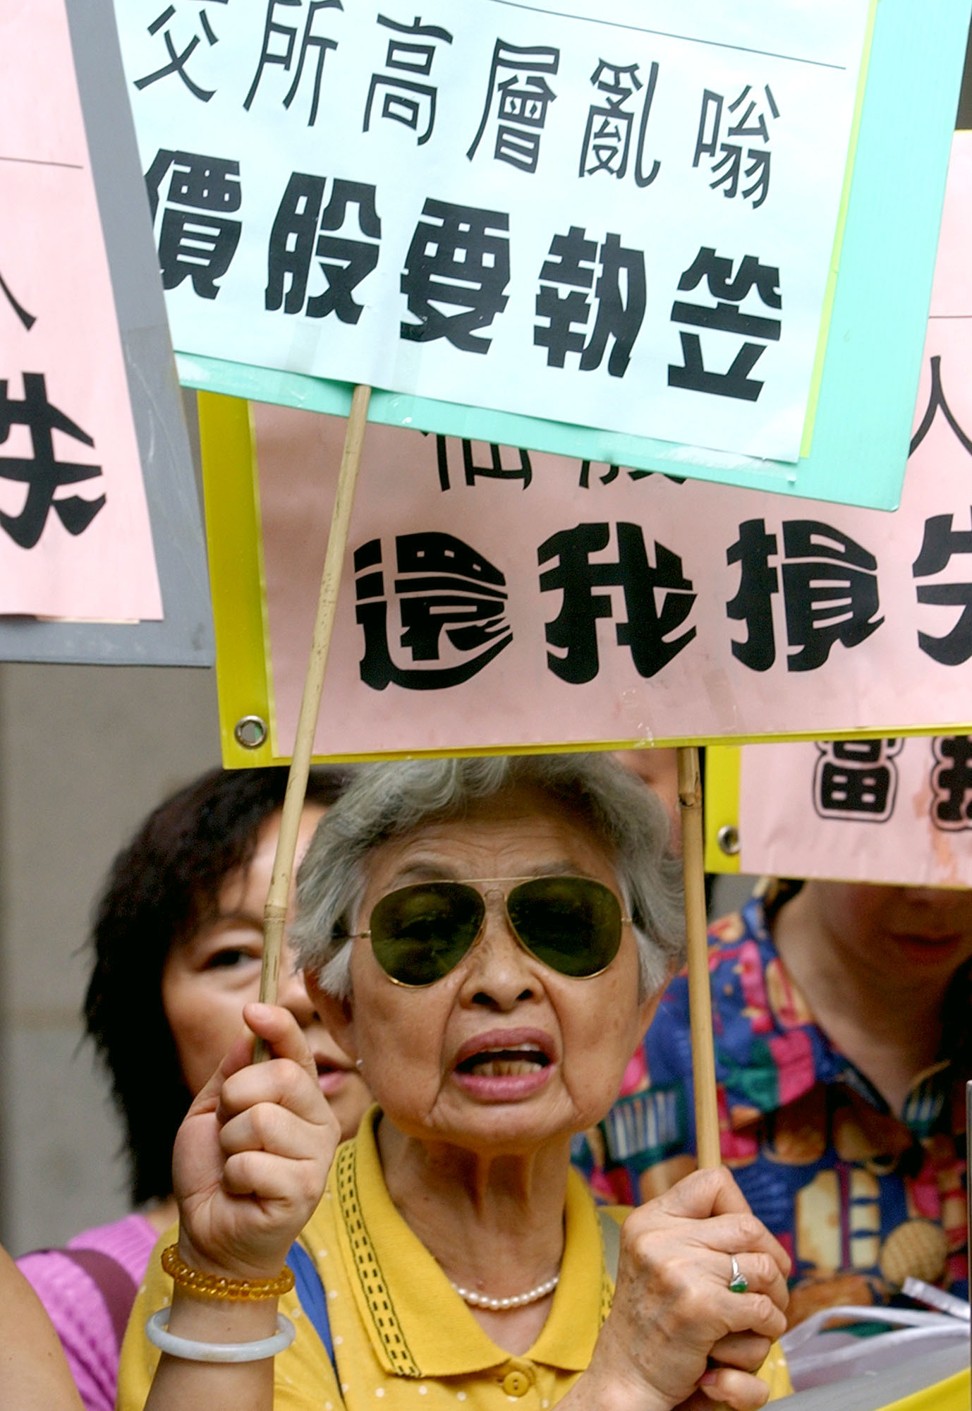 Protesters shout slogans as they stage a rally outside Hong Kong's Legislative Council in July 2002, before the Financial Affairs Panel starts looking into the debacle that slammed Hong Kong's market. With accusations flying over an unfolding stock exchange scandal, lawmakers demanded to know what went wrong when a market reform proposal sparked a massive sell-off of so-called 